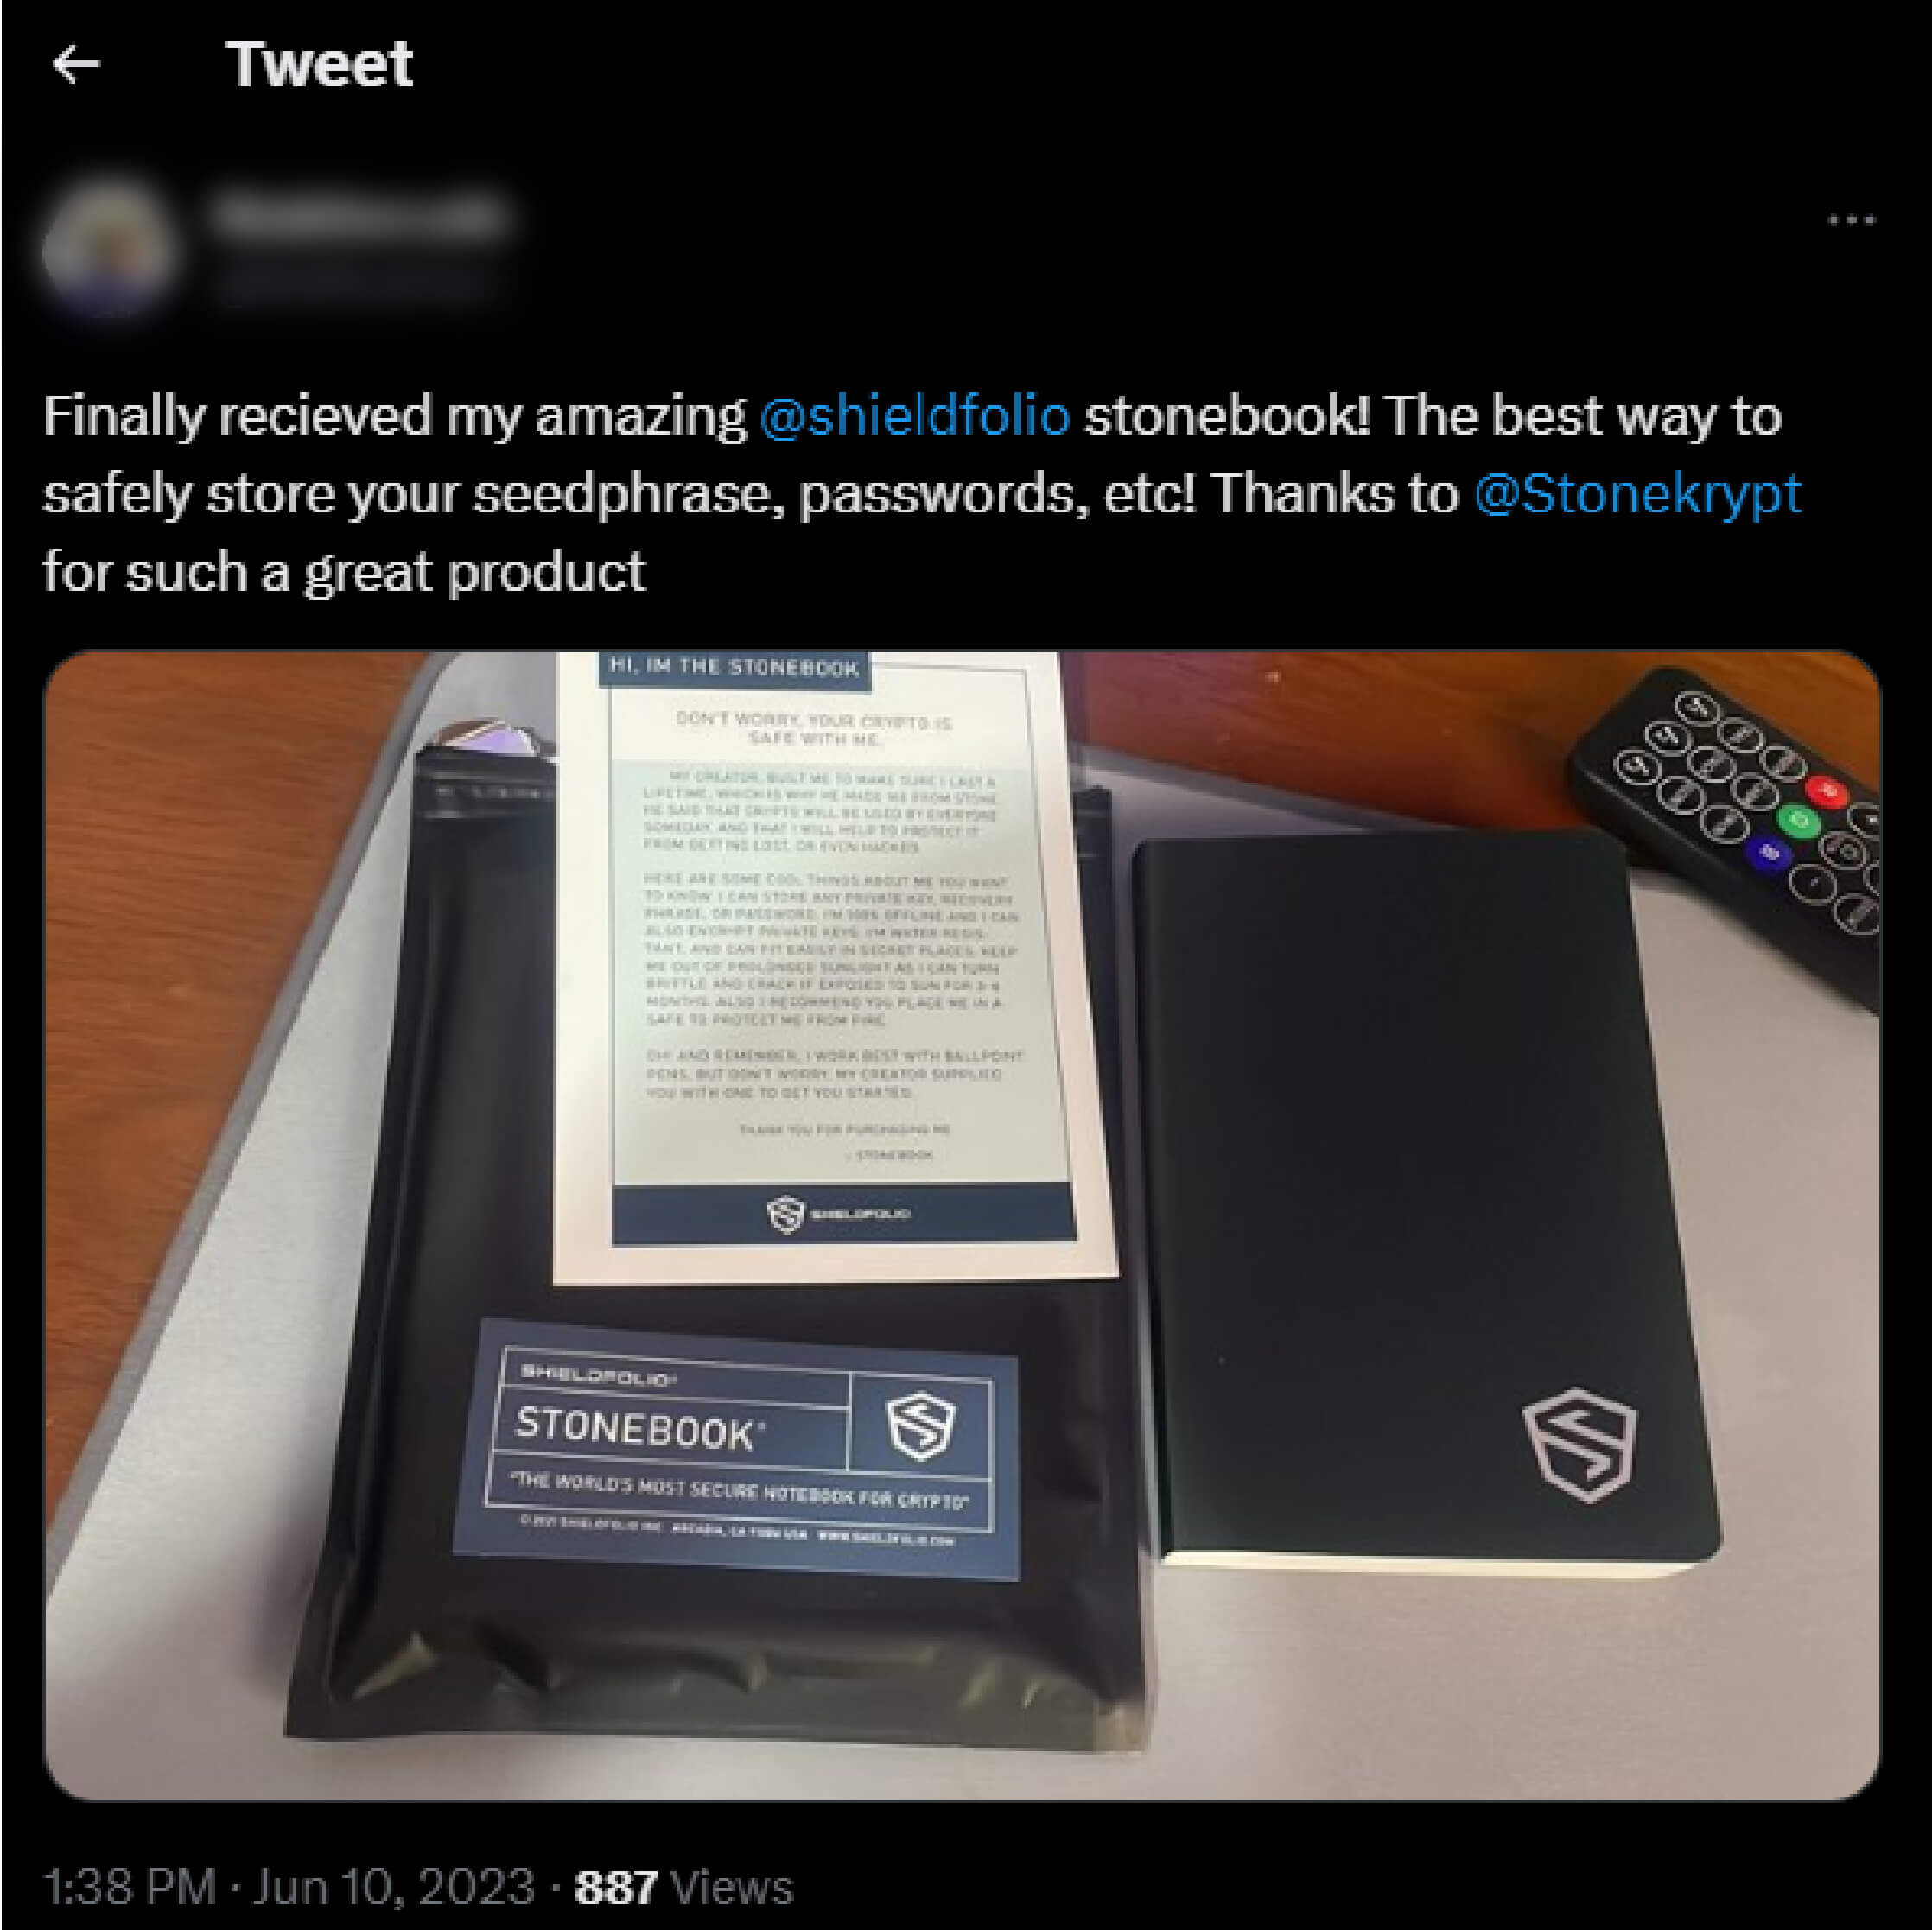 Twitter review for cold wallet seed phrase storage notebook by shieldfolio stonebook